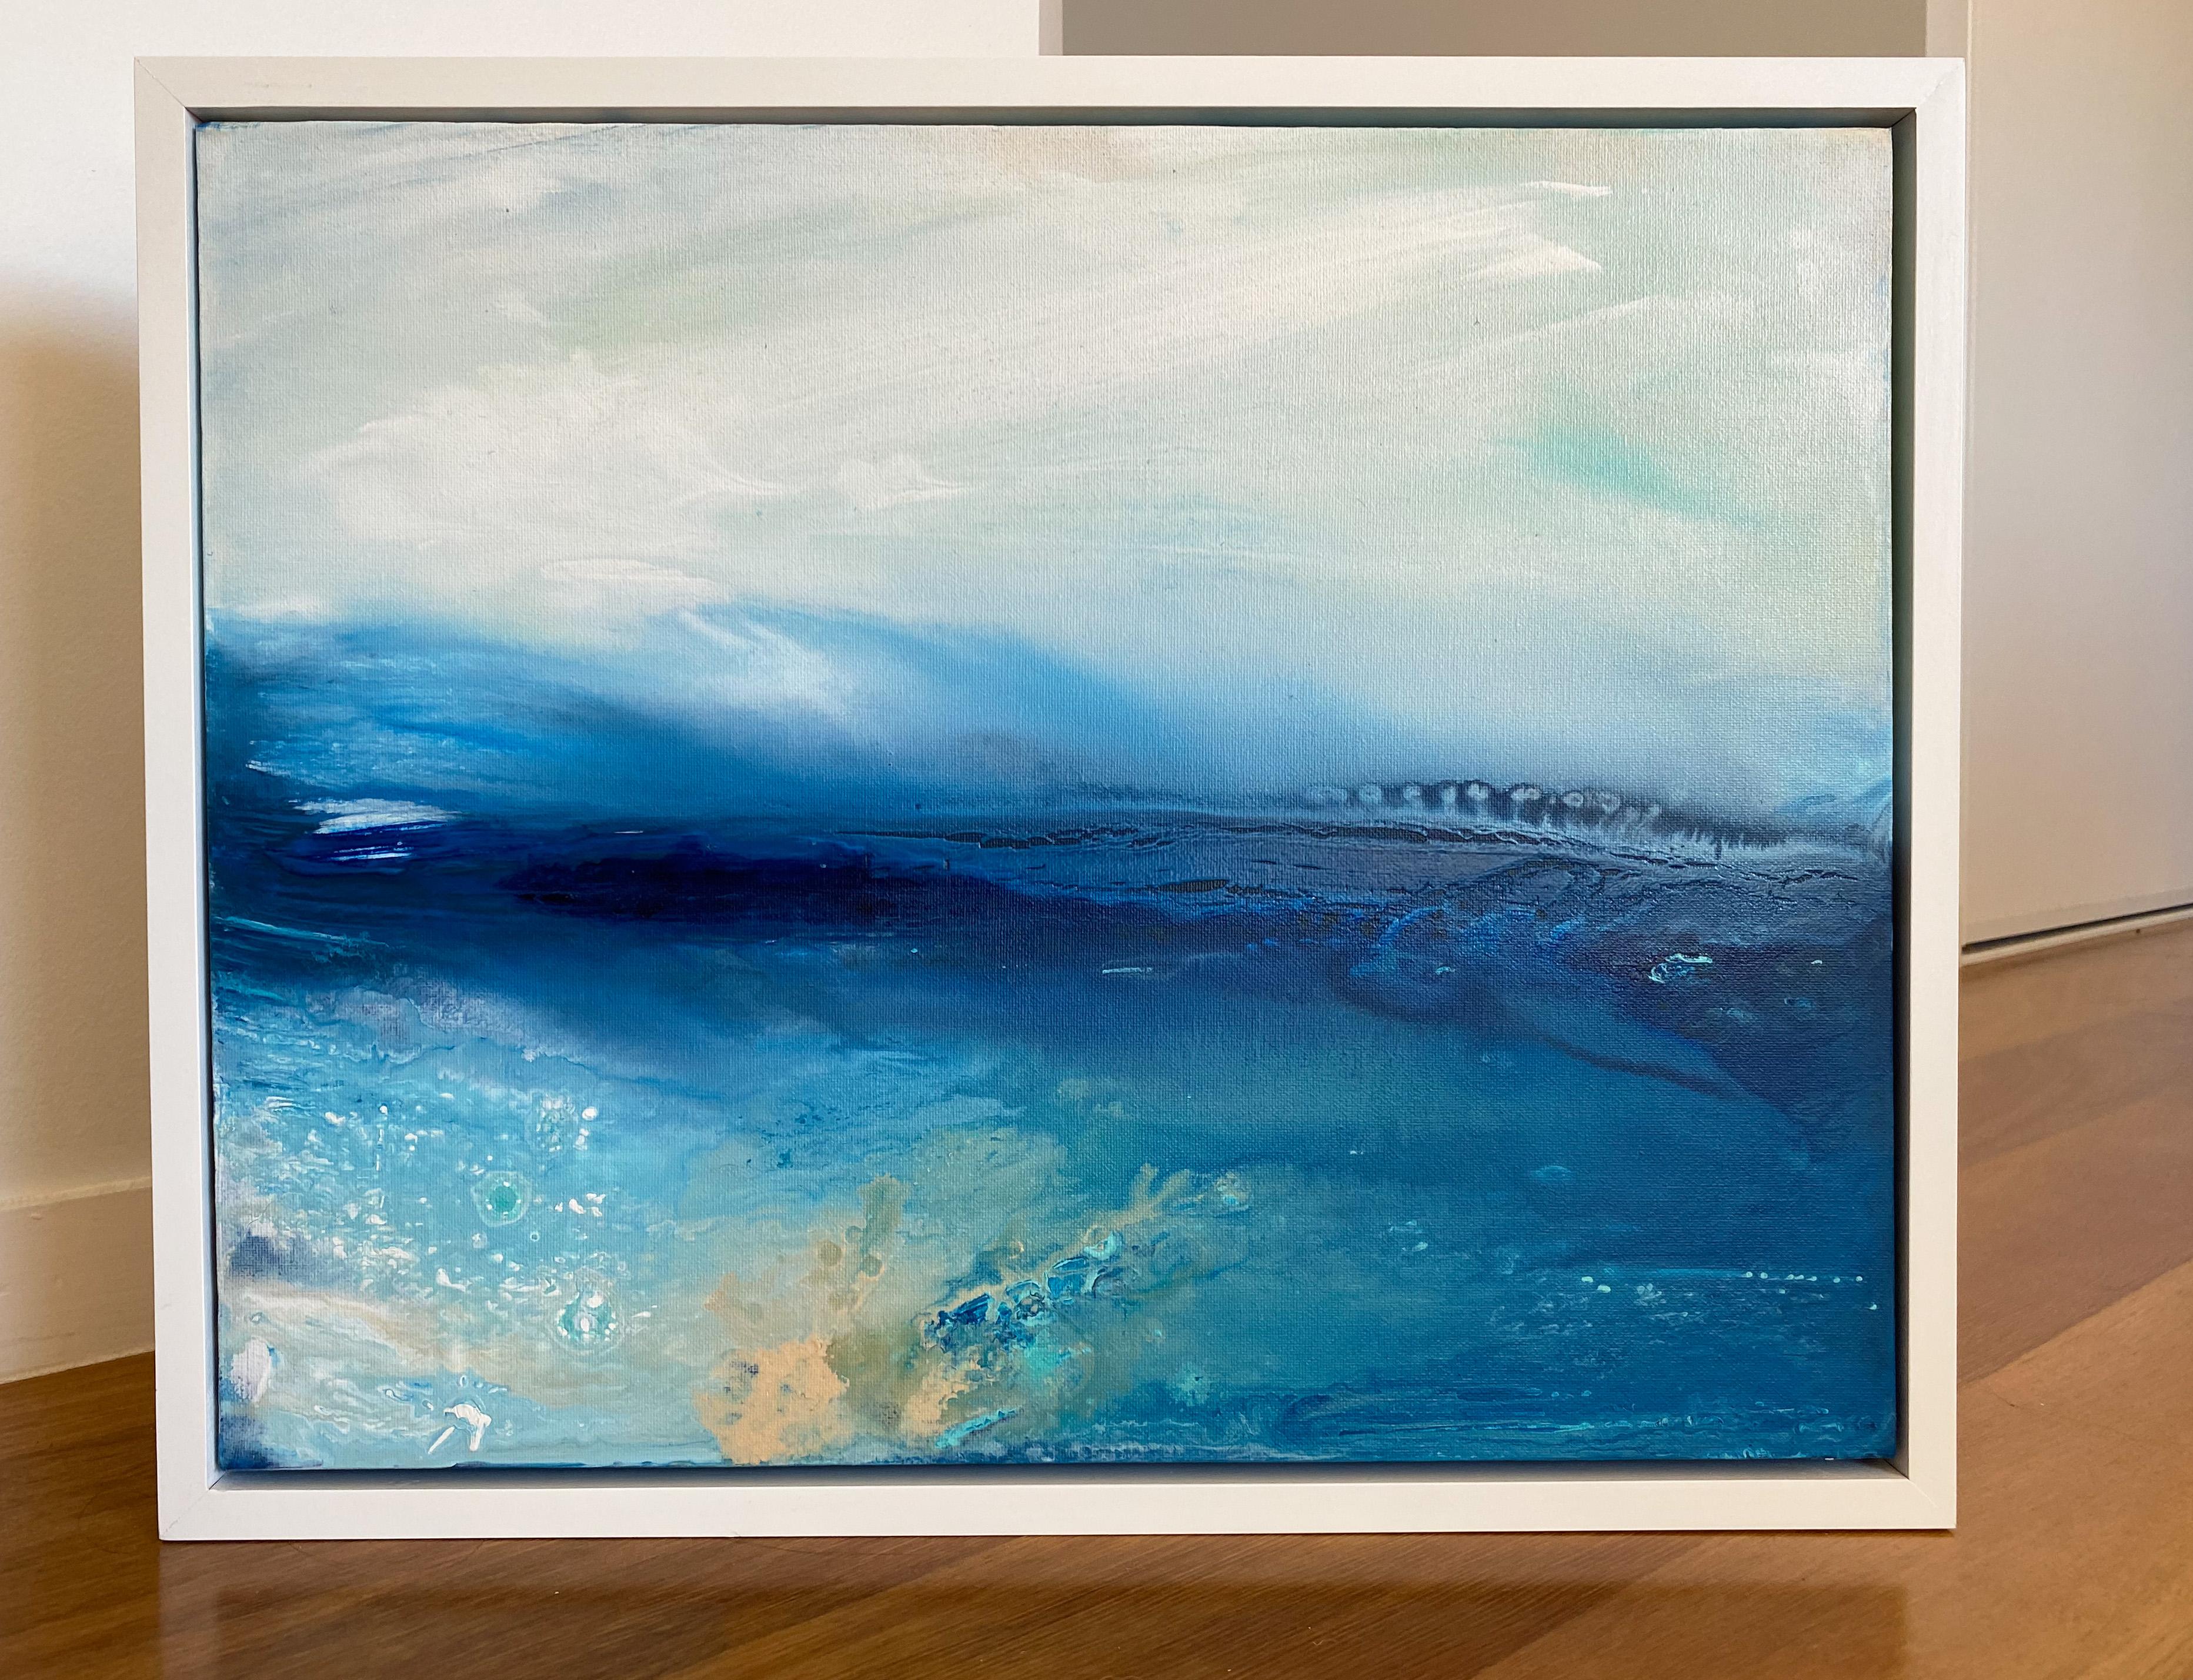 Seascape no1 coastal blue ocean waves abstract waters framed in white timber - Painting by Kathleen Rhee